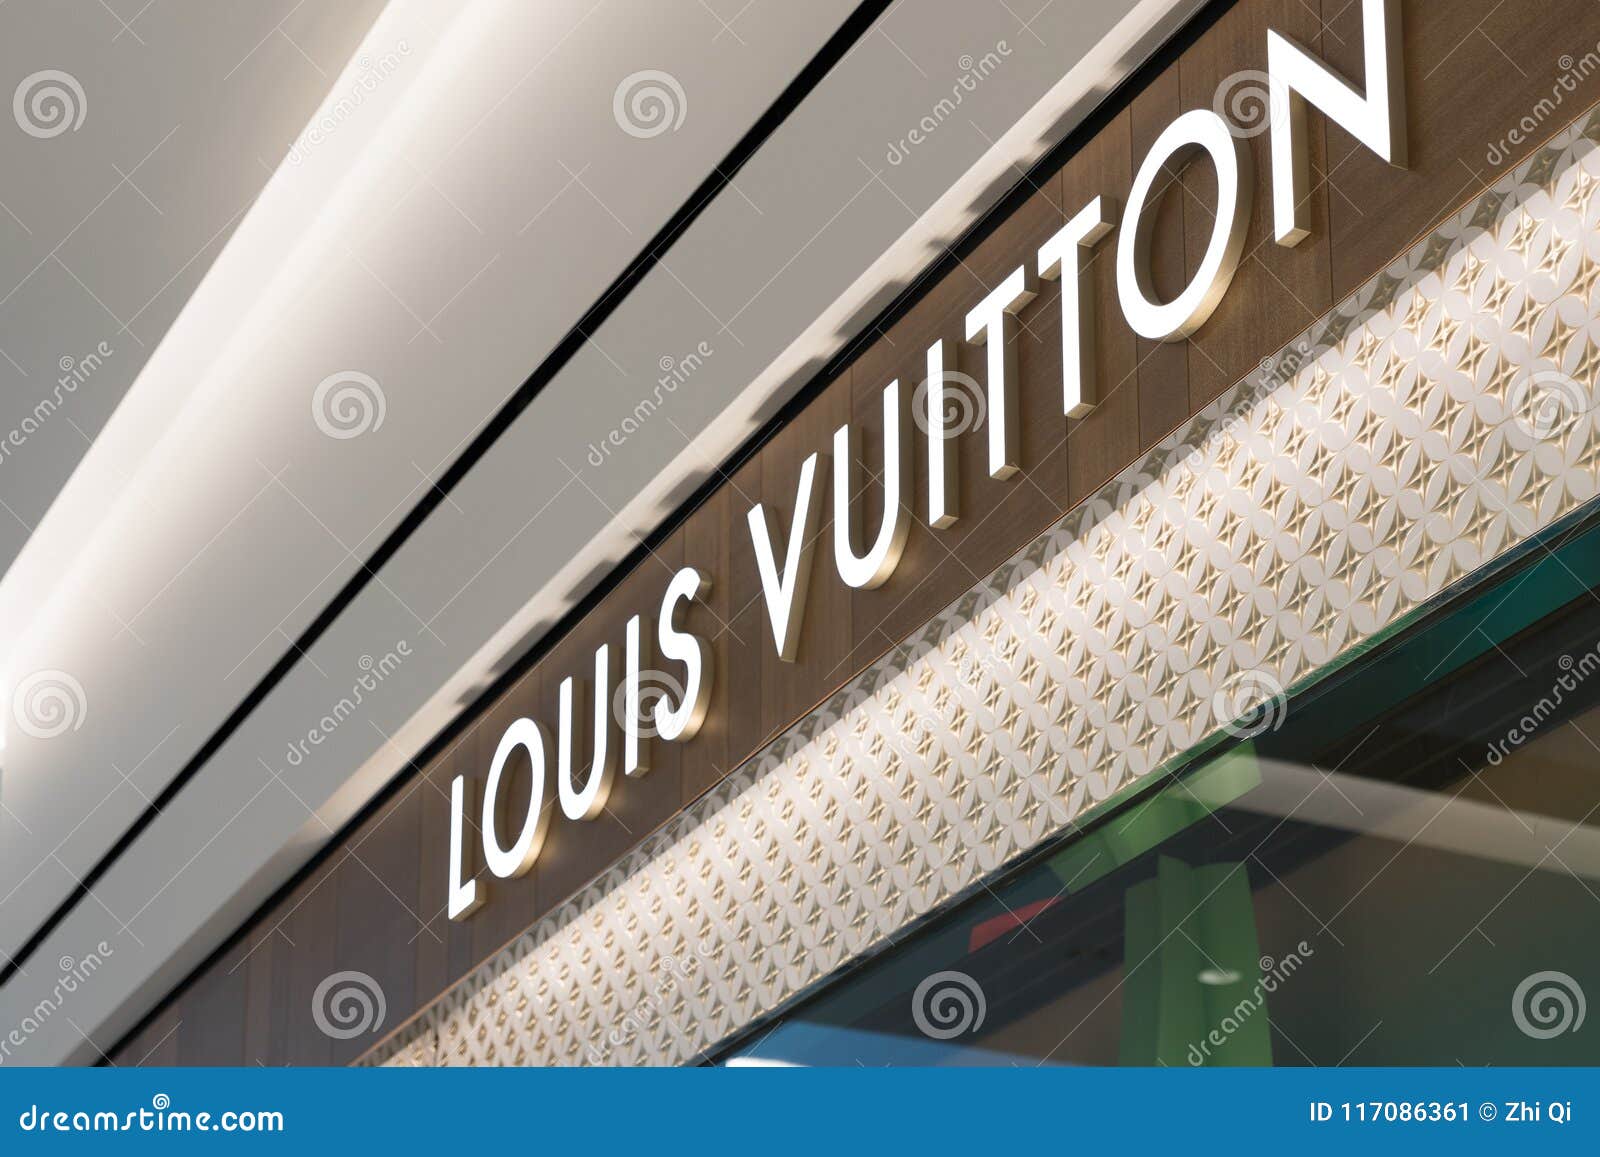 Inside Louis Vuitton Store At King Of Prussia Mall. Editorial Photo - Image of fashionable ...